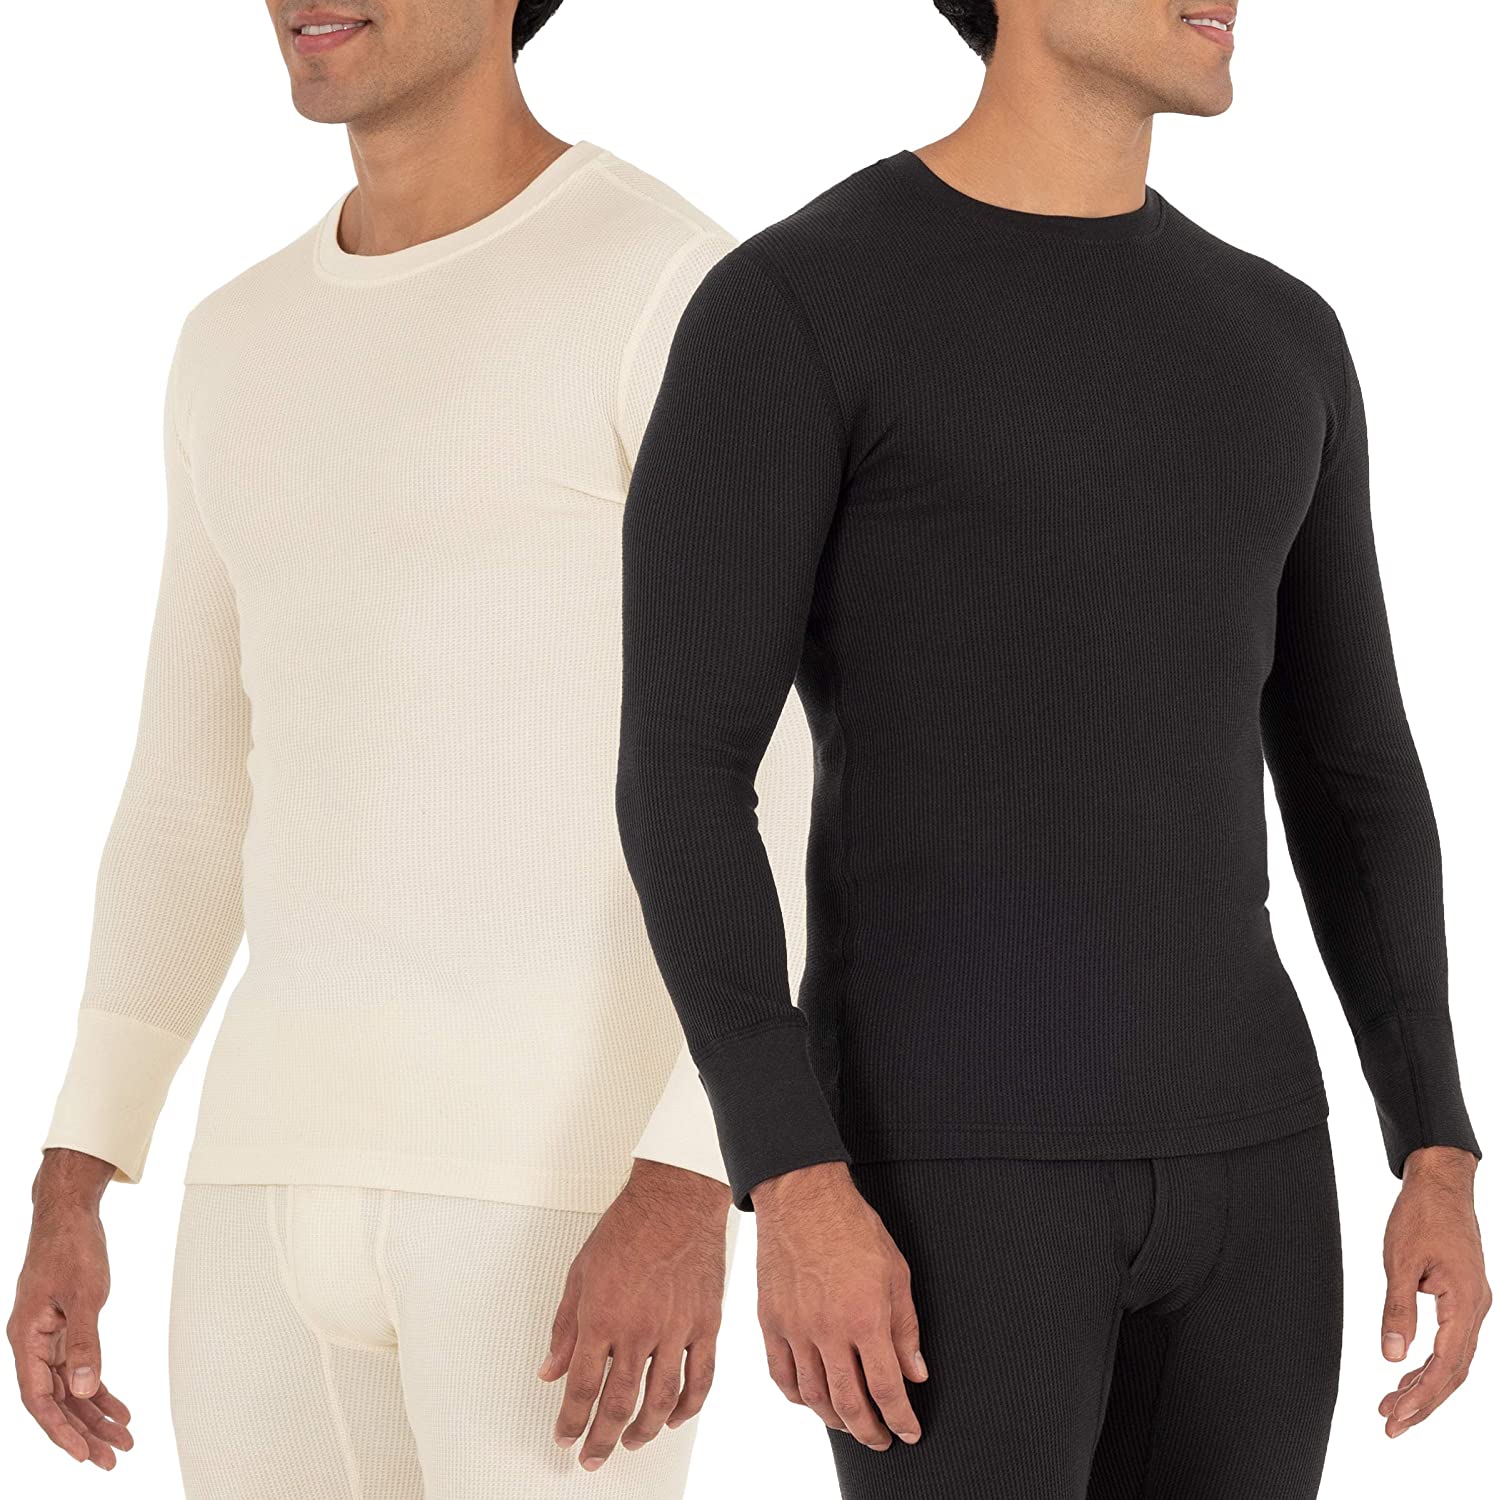 1 and 2 Packs Fruit of the Loom Mens Recycled Waffle Thermal Underwear Crew Top